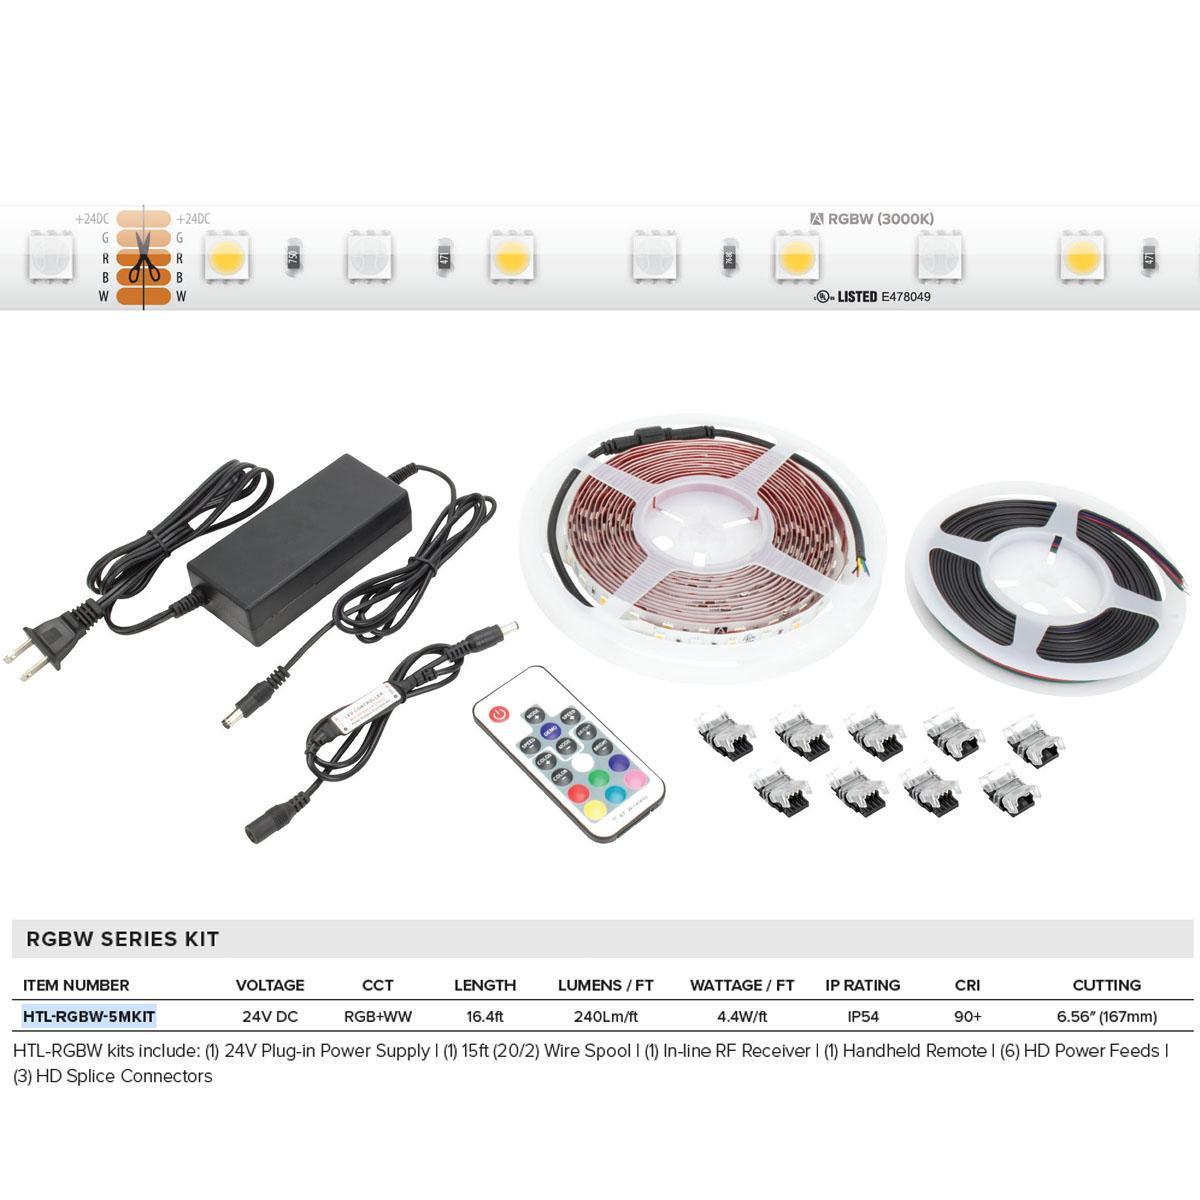 Trulux High Output LED Strip Light Kit with Remote control, 16.4Ft Reel with 24V DC Kit with Plug and Play Connection, RGB + 3000K, 240 Lumens per Ft - Bees Lighting